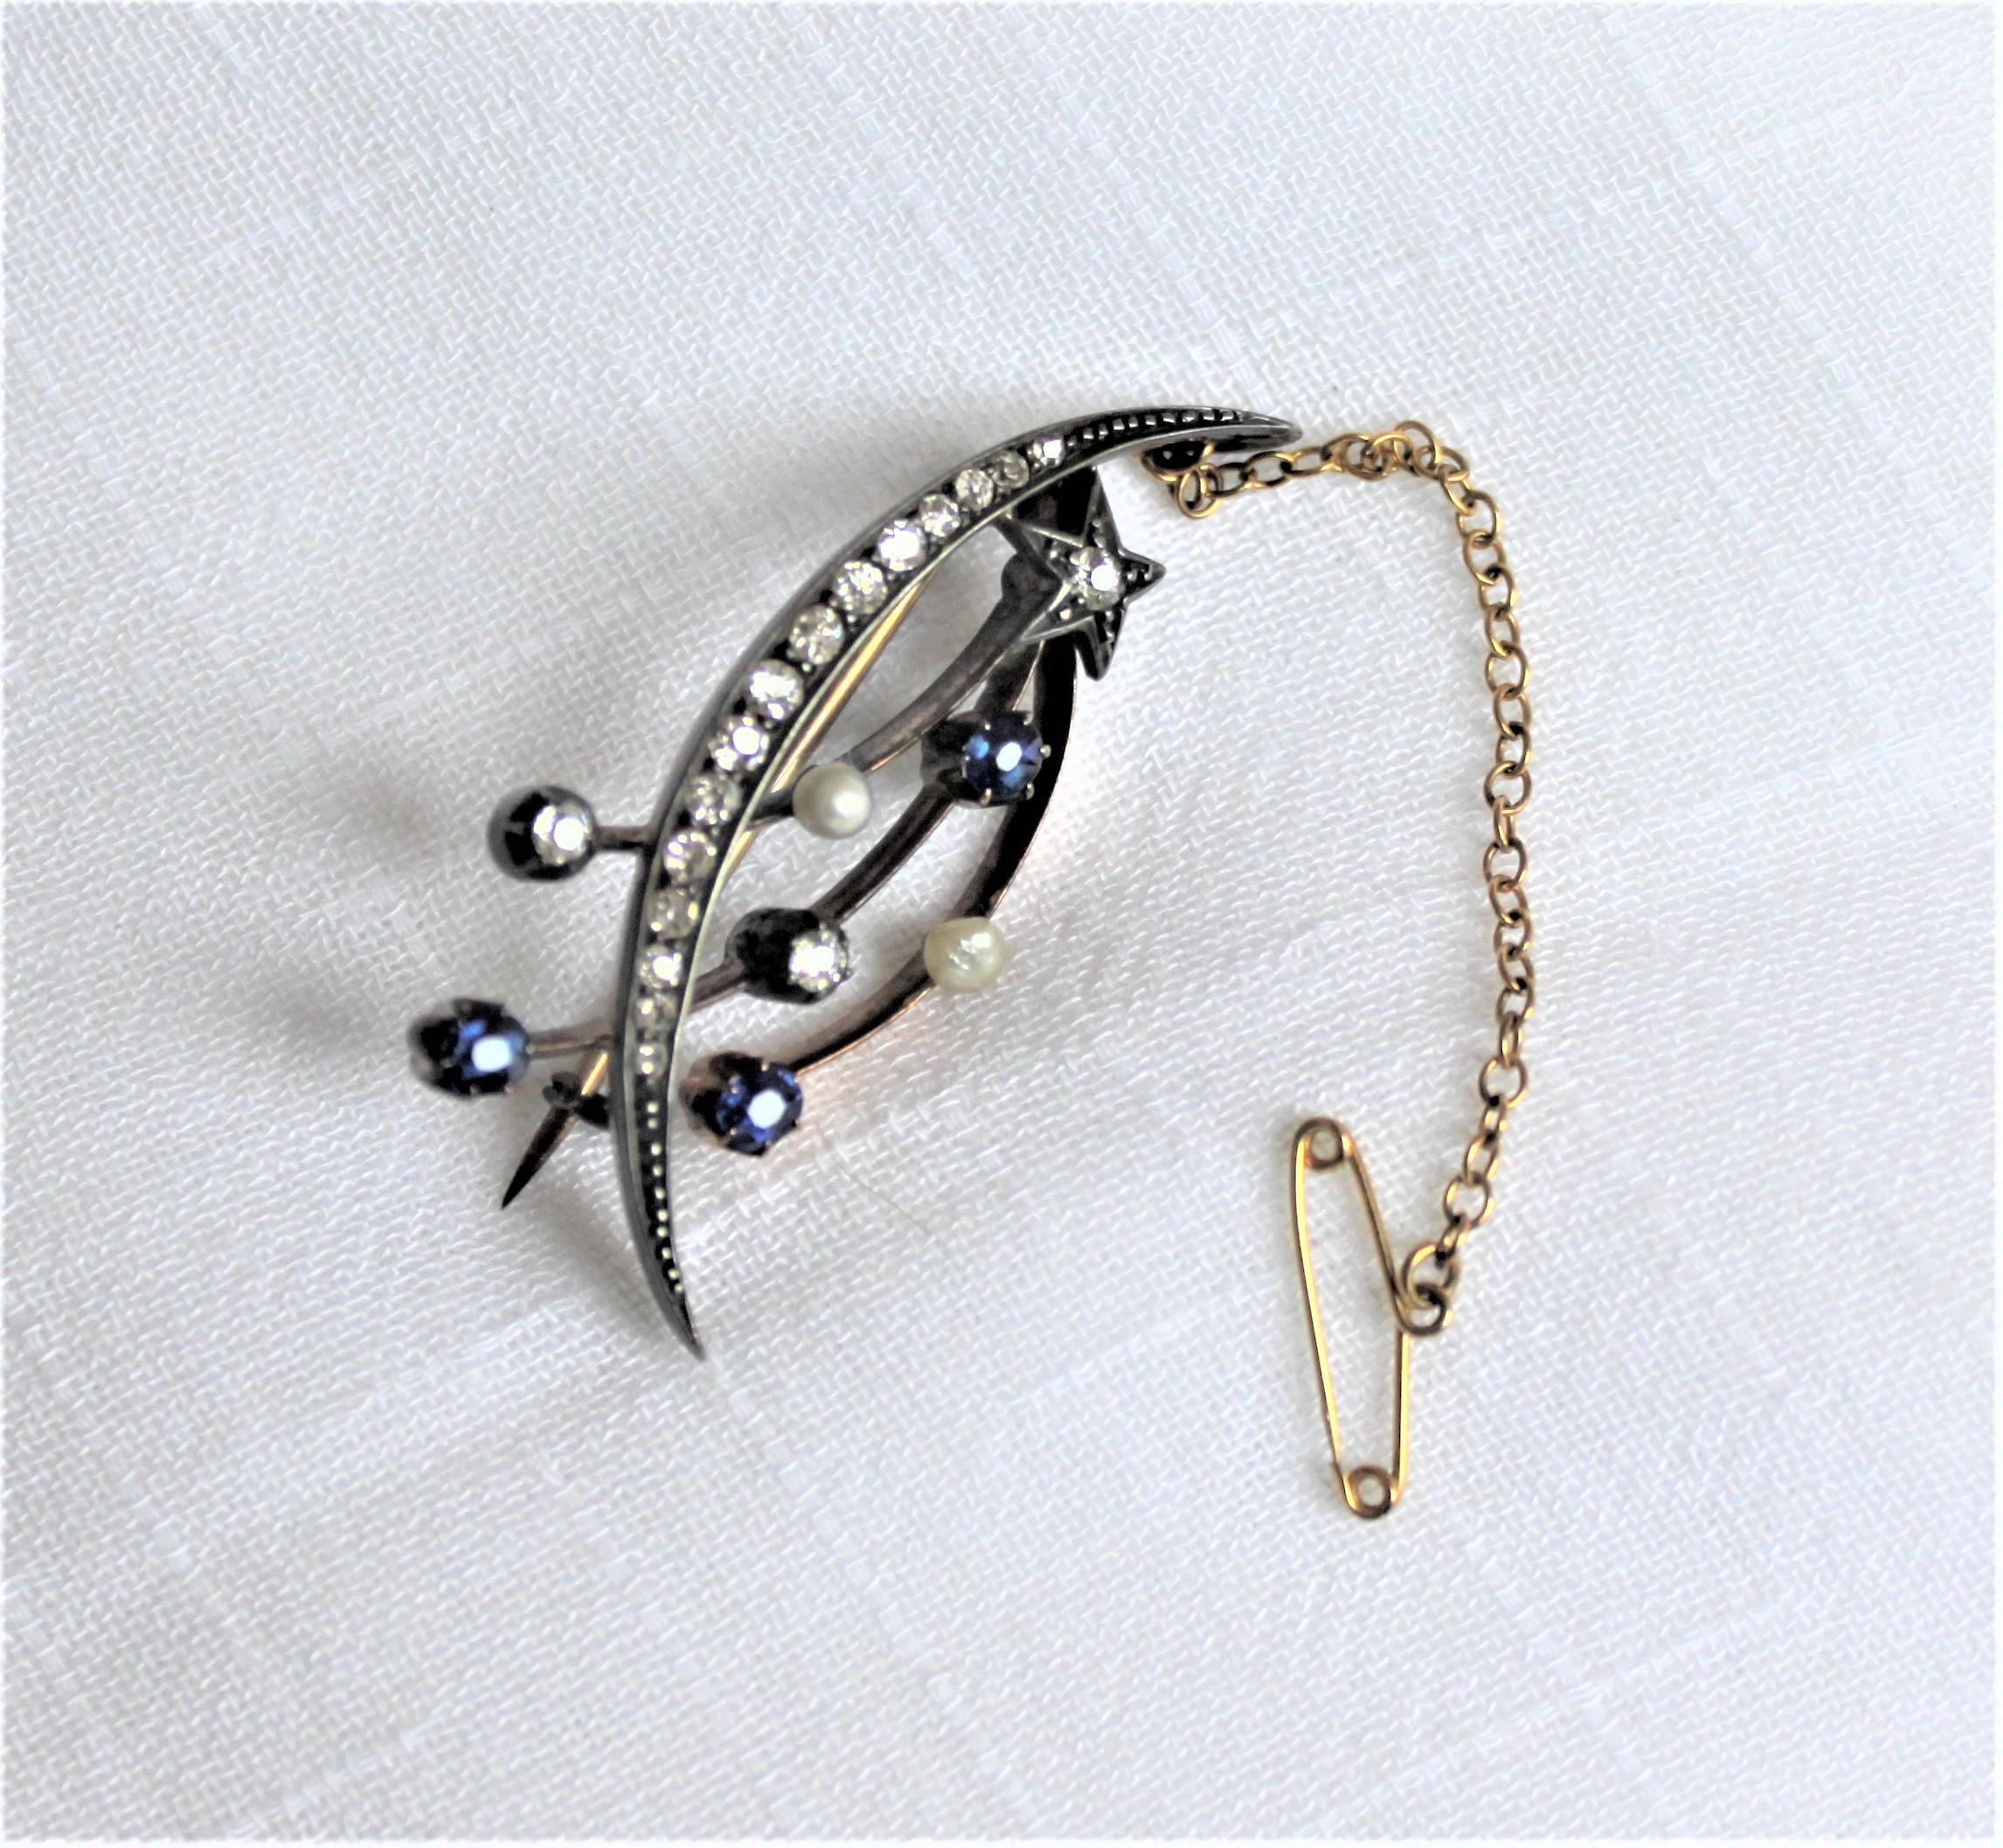 Antique Victorian Gold, Silver, Diamond & Sapphire Shooting Star or Comet Brooch 2